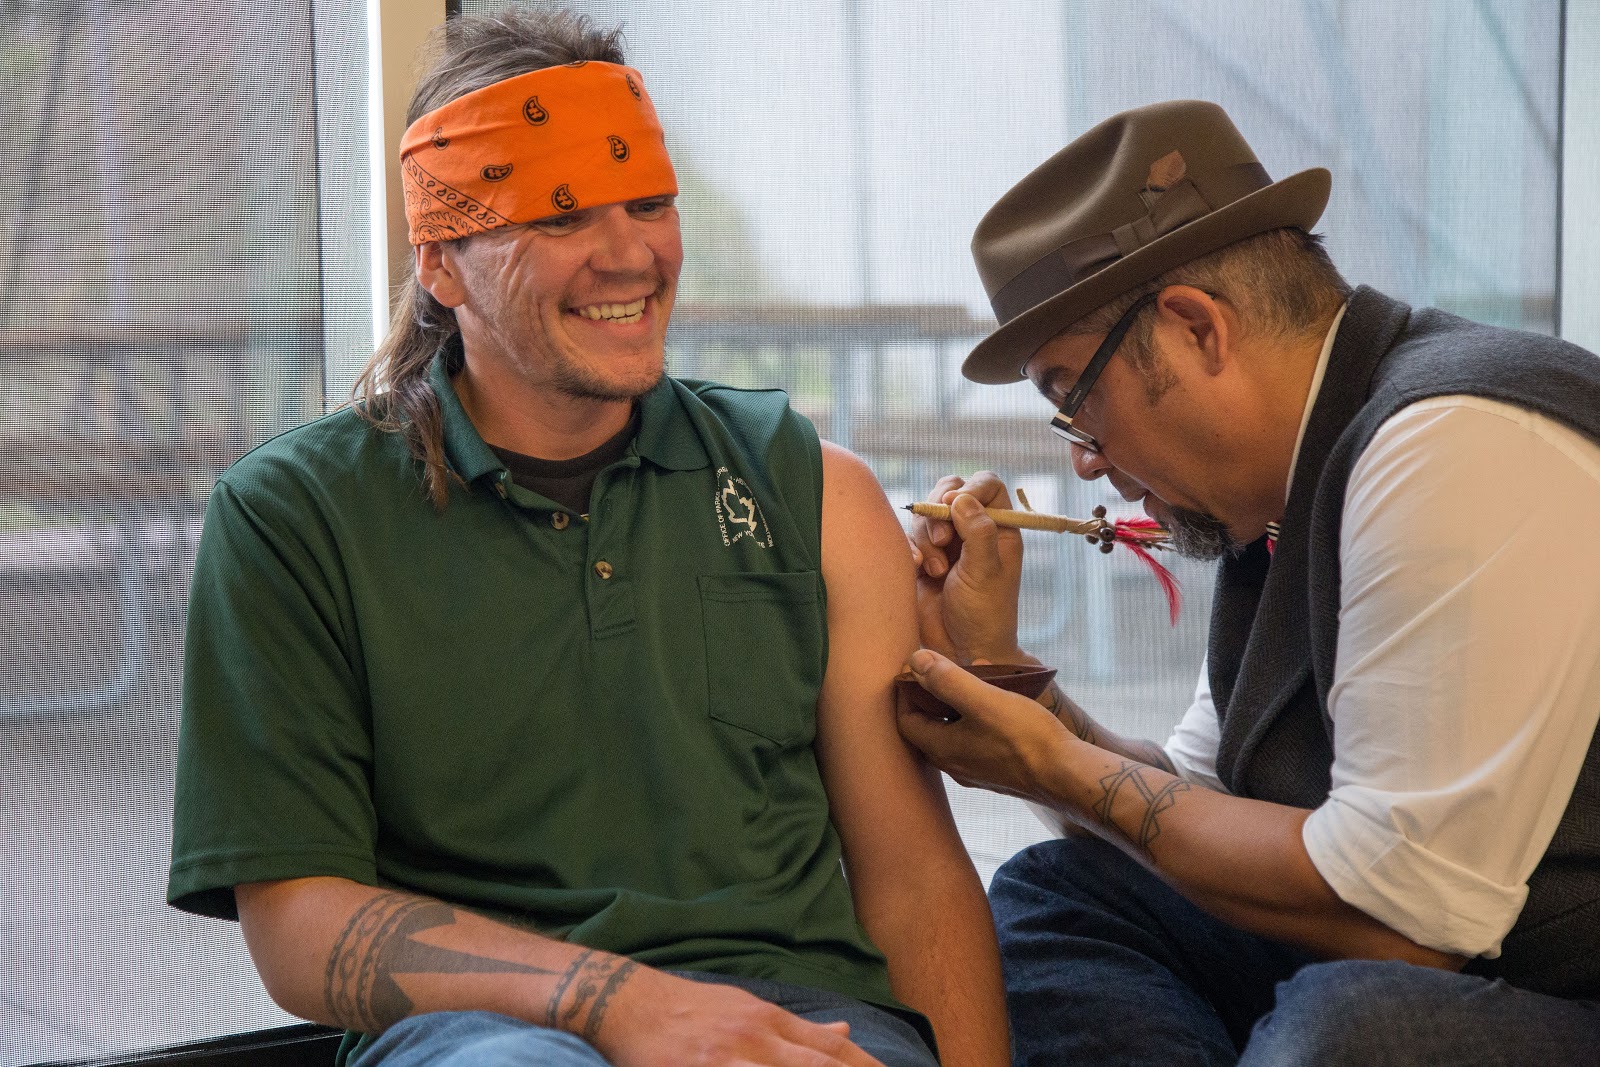 Elli Carr, Mohawk receiving his tattoo. He said it was a more comfortable experience than getting tattooed with an electric tattoo machine. Photo: Alex Hamer